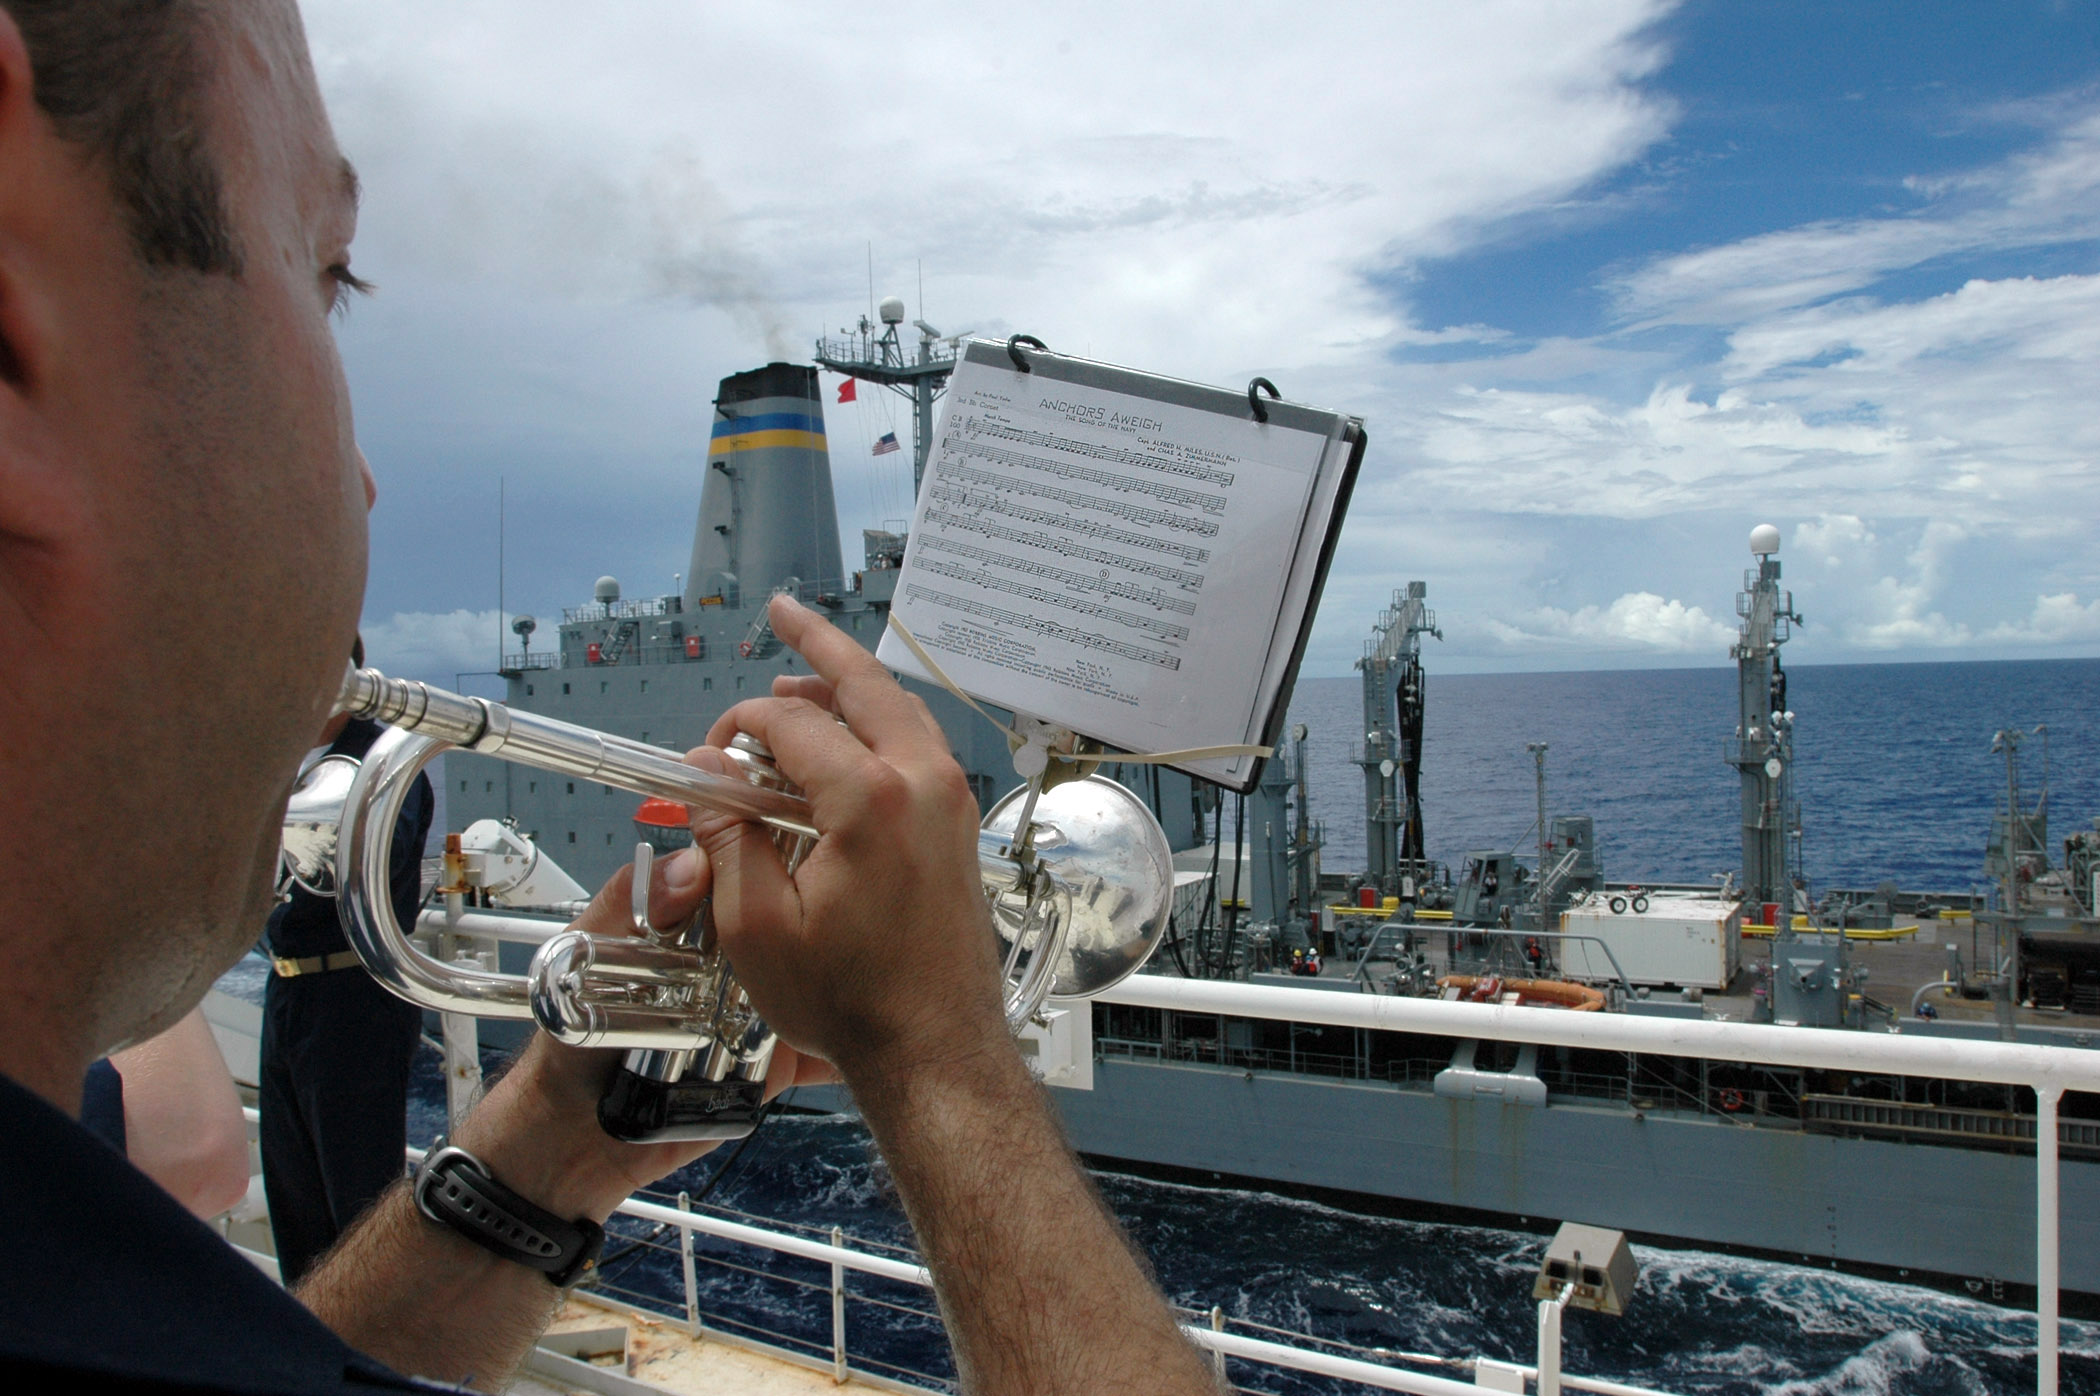 US Navy 060516-N-9076B-024 Musician 1st Class Brian Grondell plays Anchors Away during an underway replenishment between the USNS Pecos and USNS Mercy